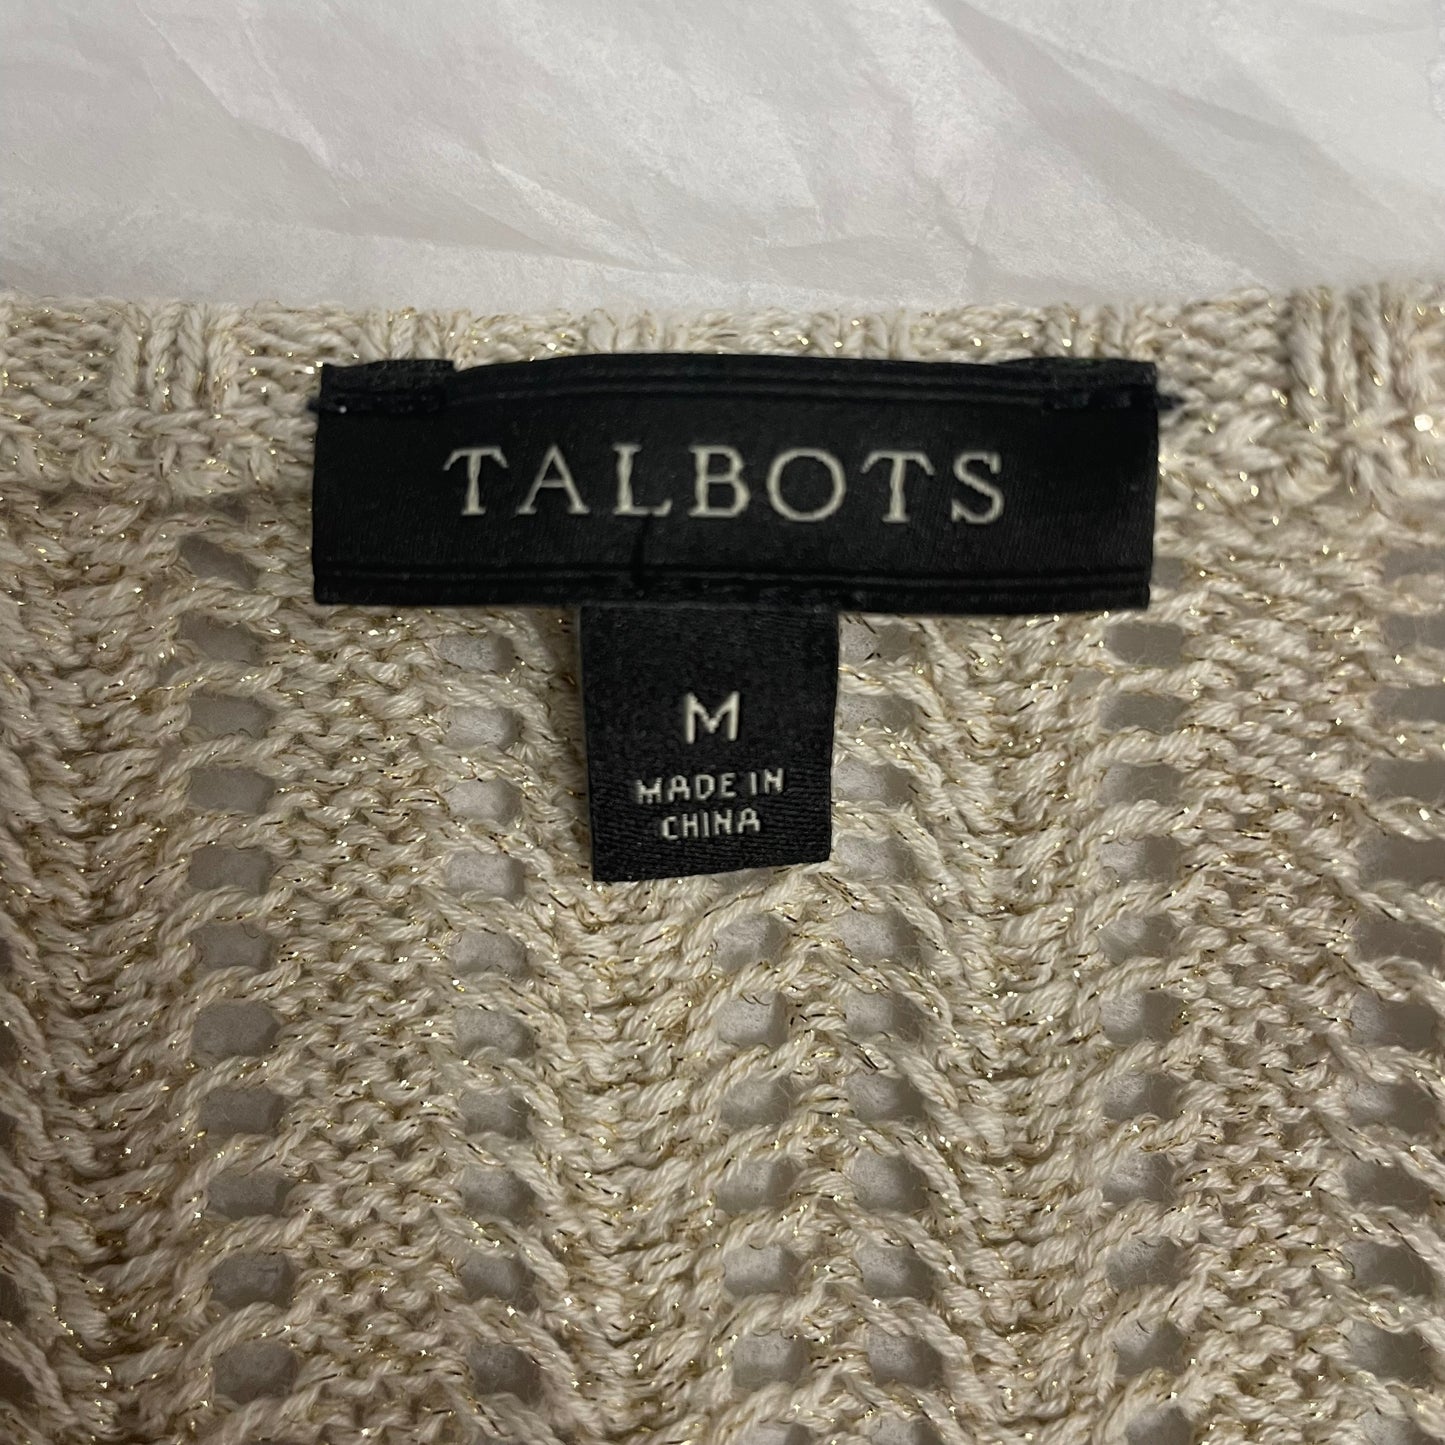 Top Short Sleeve By Talbots O  Size: M